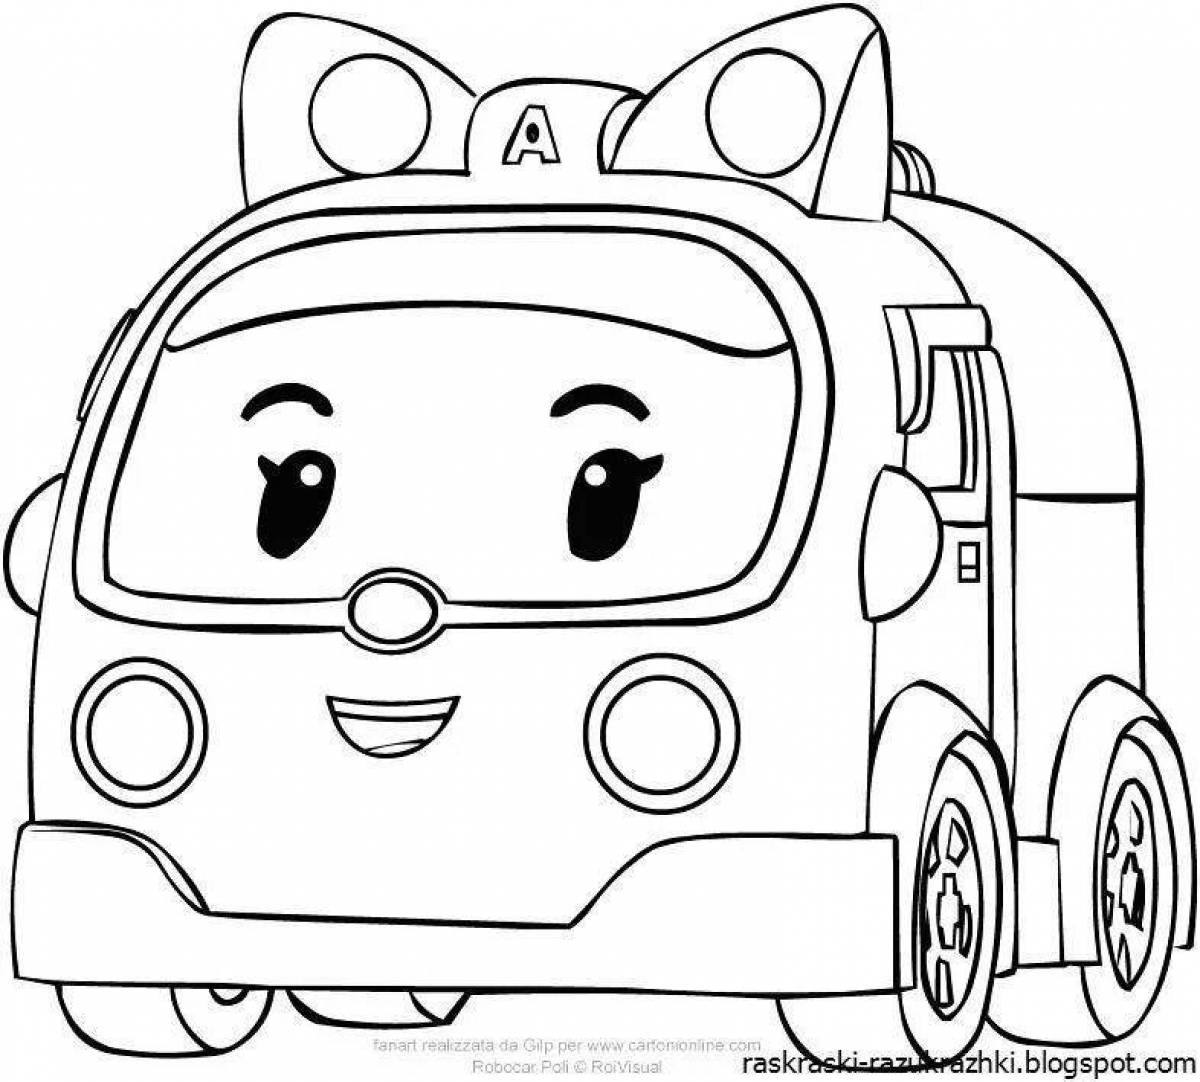 Adorable cartoon coloring book for kids 4-5 years old